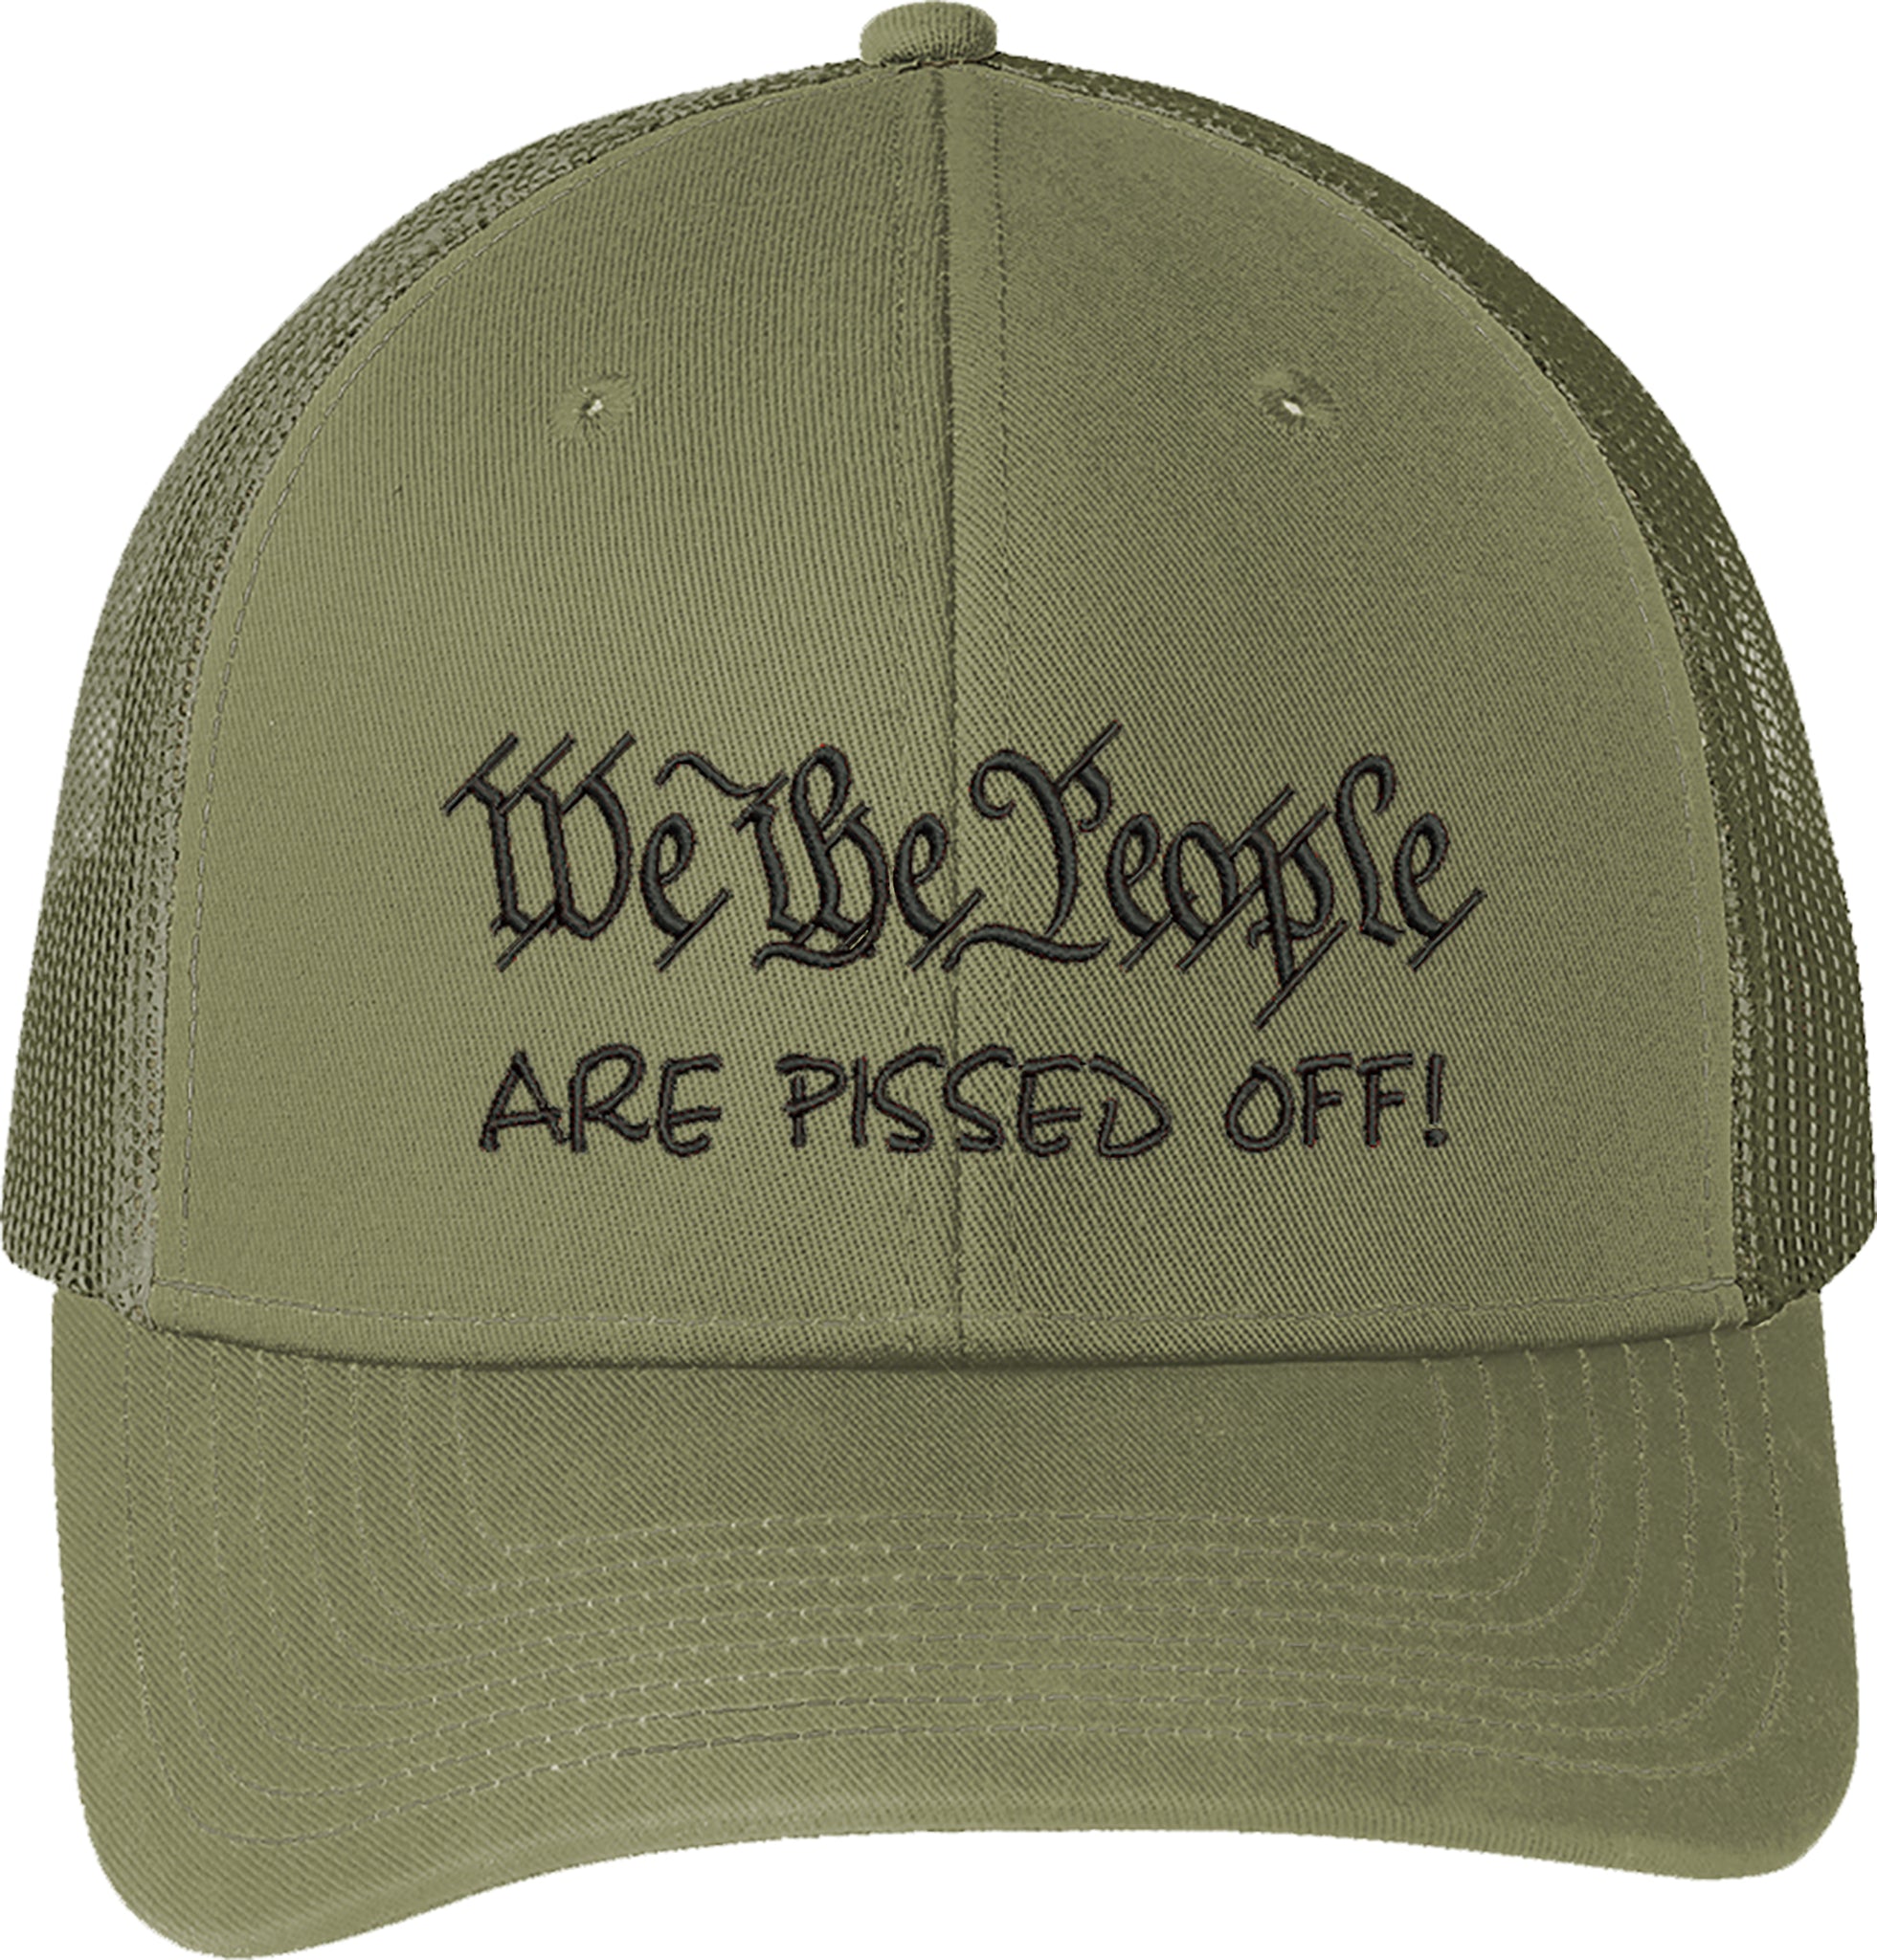 We the people are pissed off Trucker Mesh-Back  Embroidered Baseball One Size Fits All Structured Hat